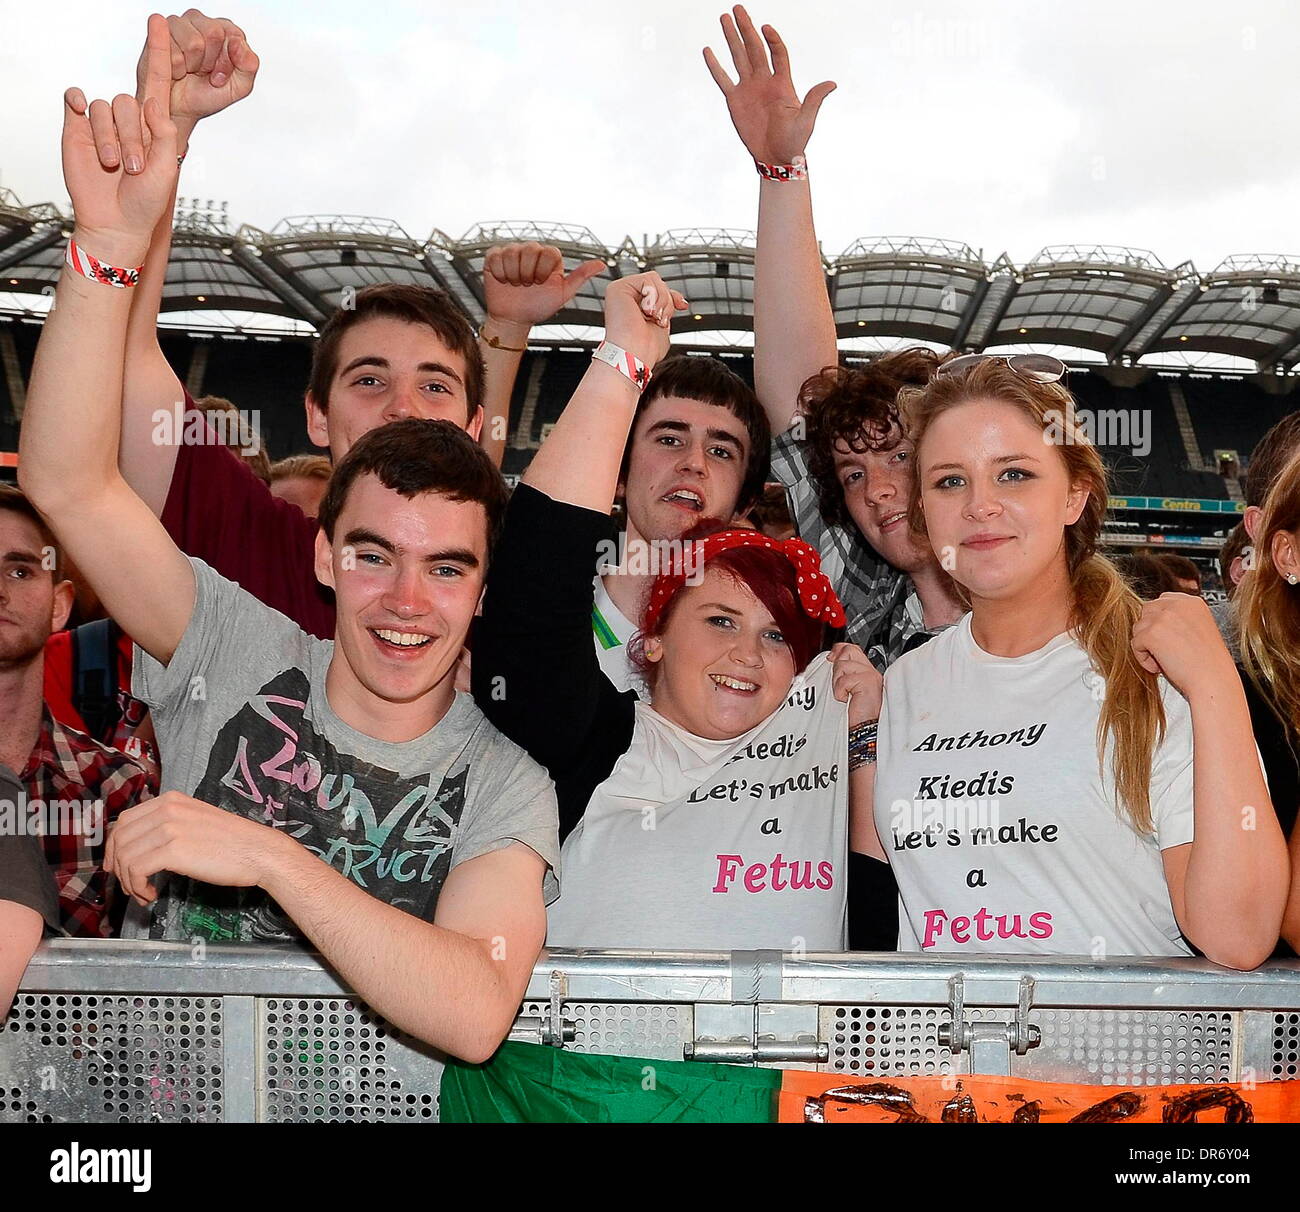 Fans The Red Hot Chili Peppers perform at Croke Park Dublin, Ireland -  26.06.12 Stock Photo - Alamy